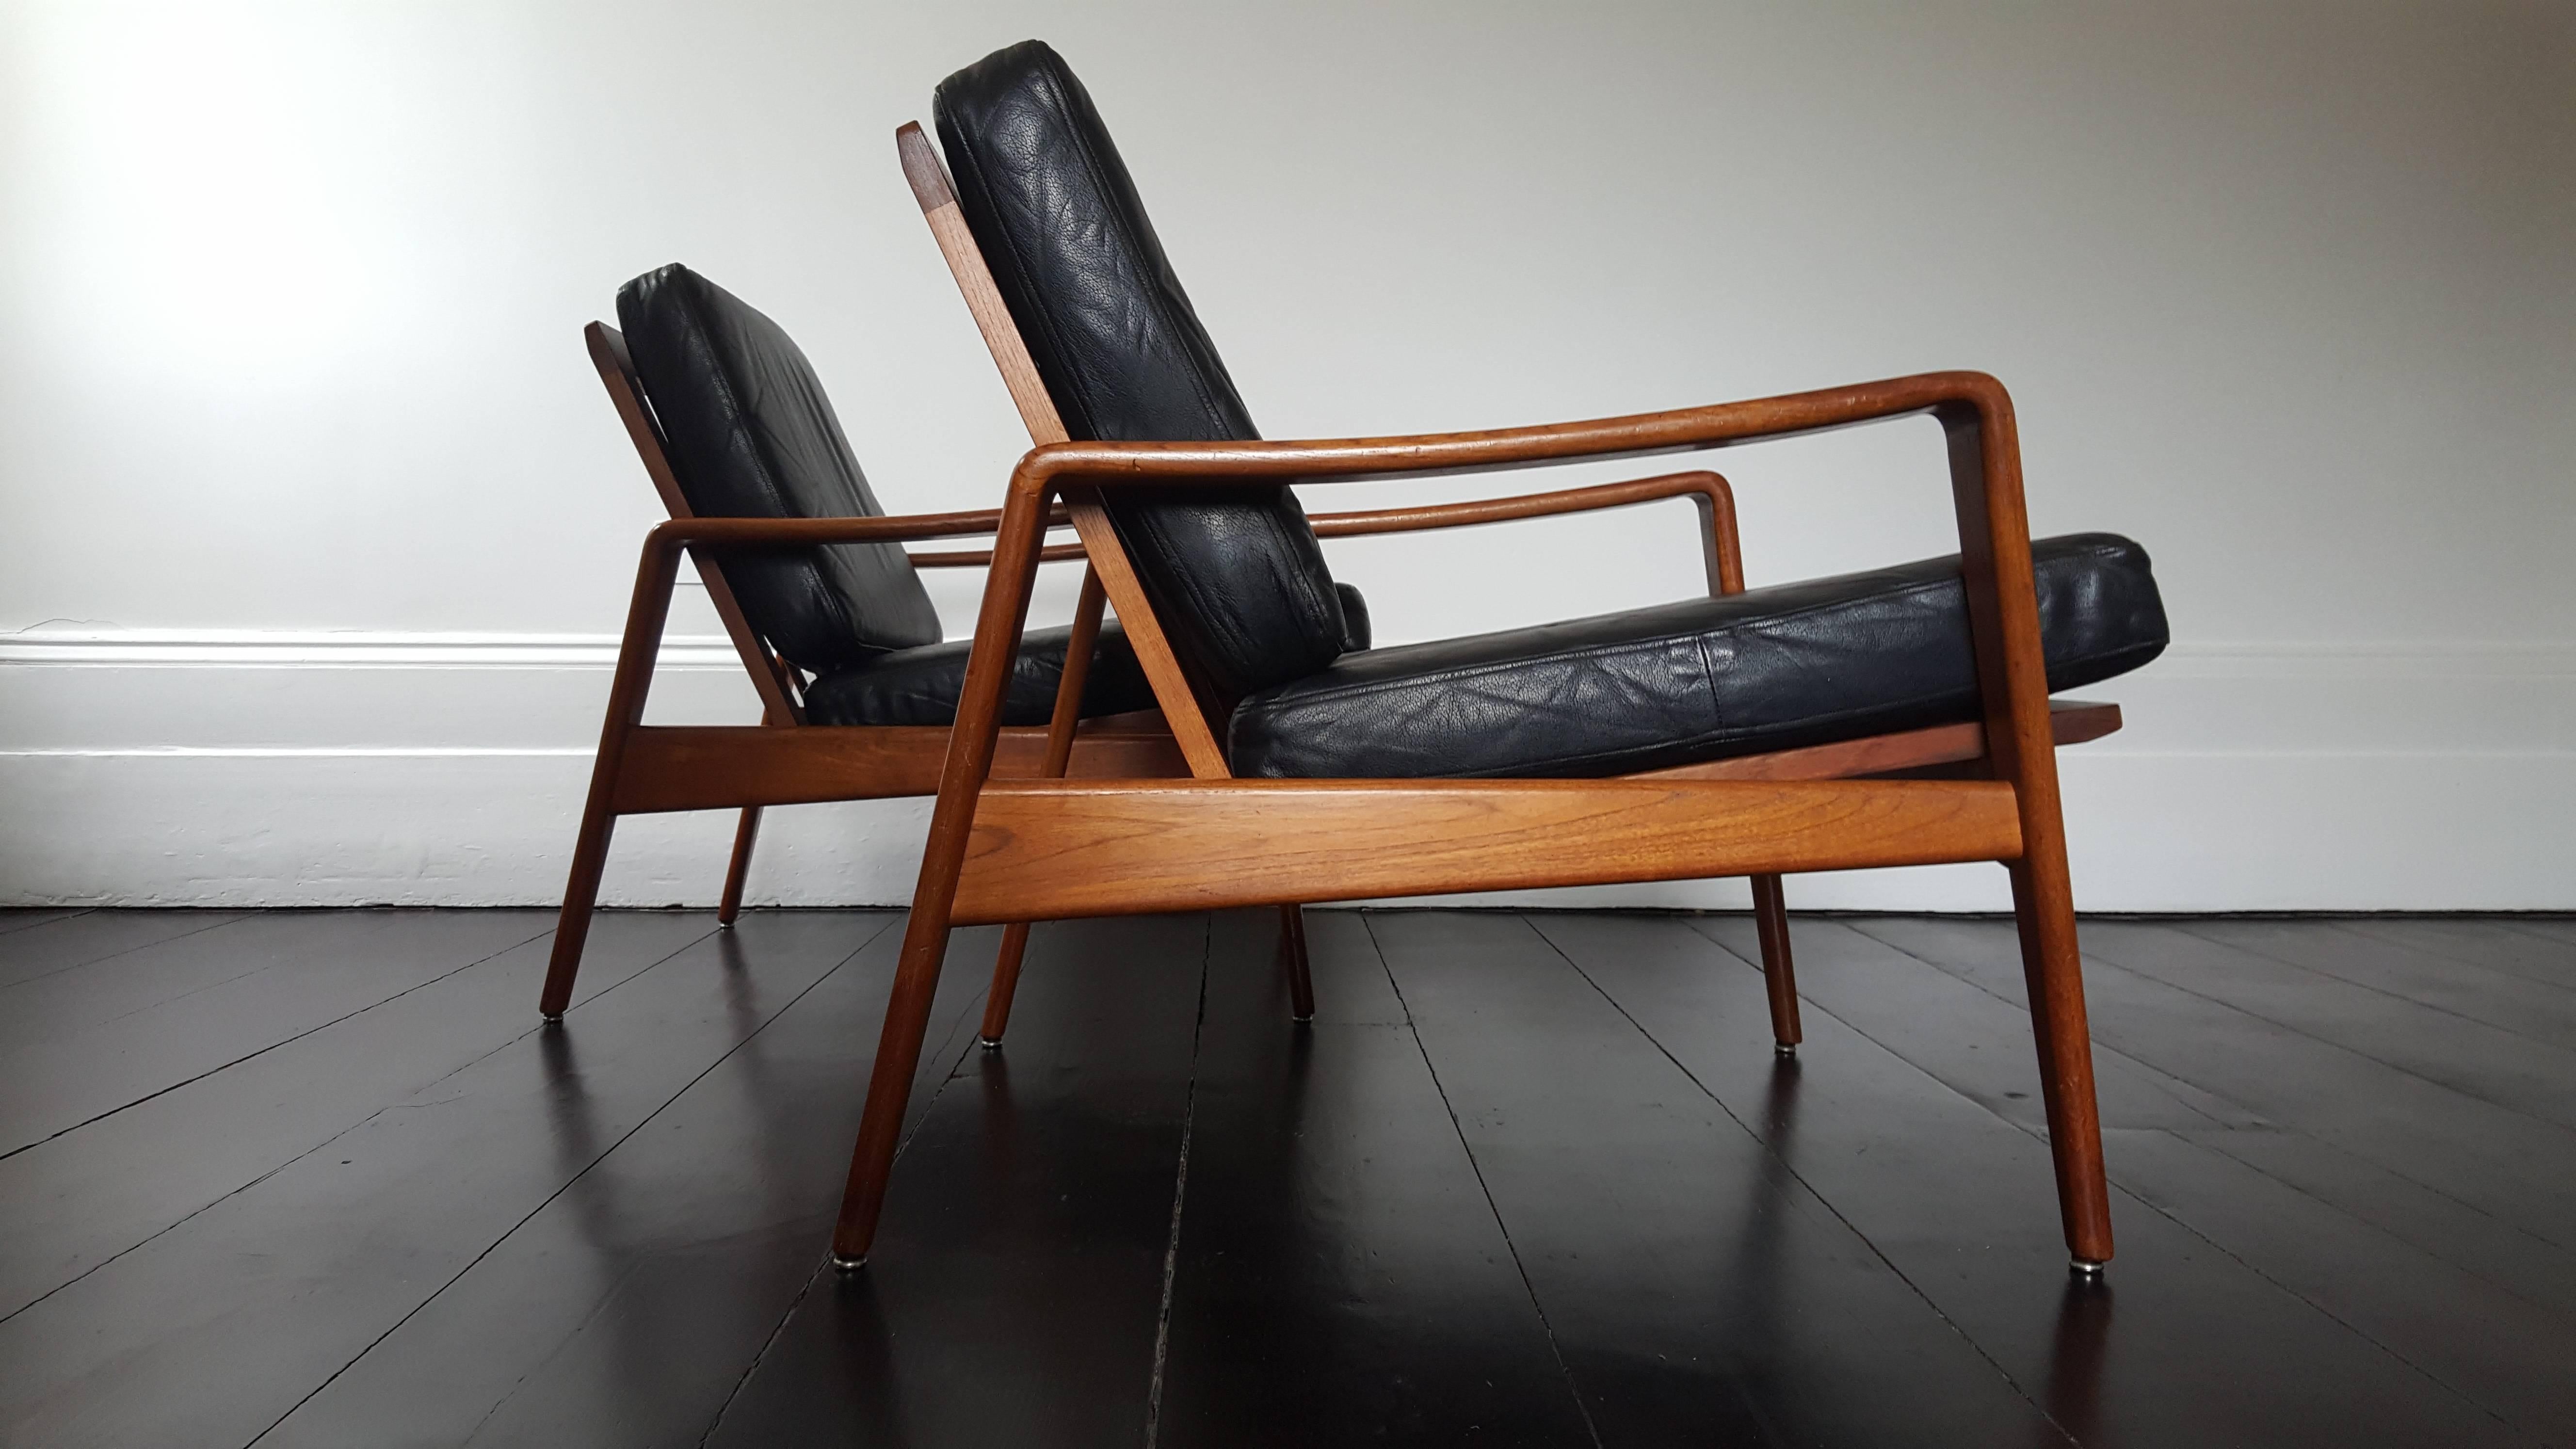 Great lounge chairs by Arne Wahl Iversen manufactured and stamped by Komfort, Denmark, in the 1960s.

Beautifully crafted solid teak frames with original leather upholstery. Great shape and form.

We ship globally! Please contact to discuss. We